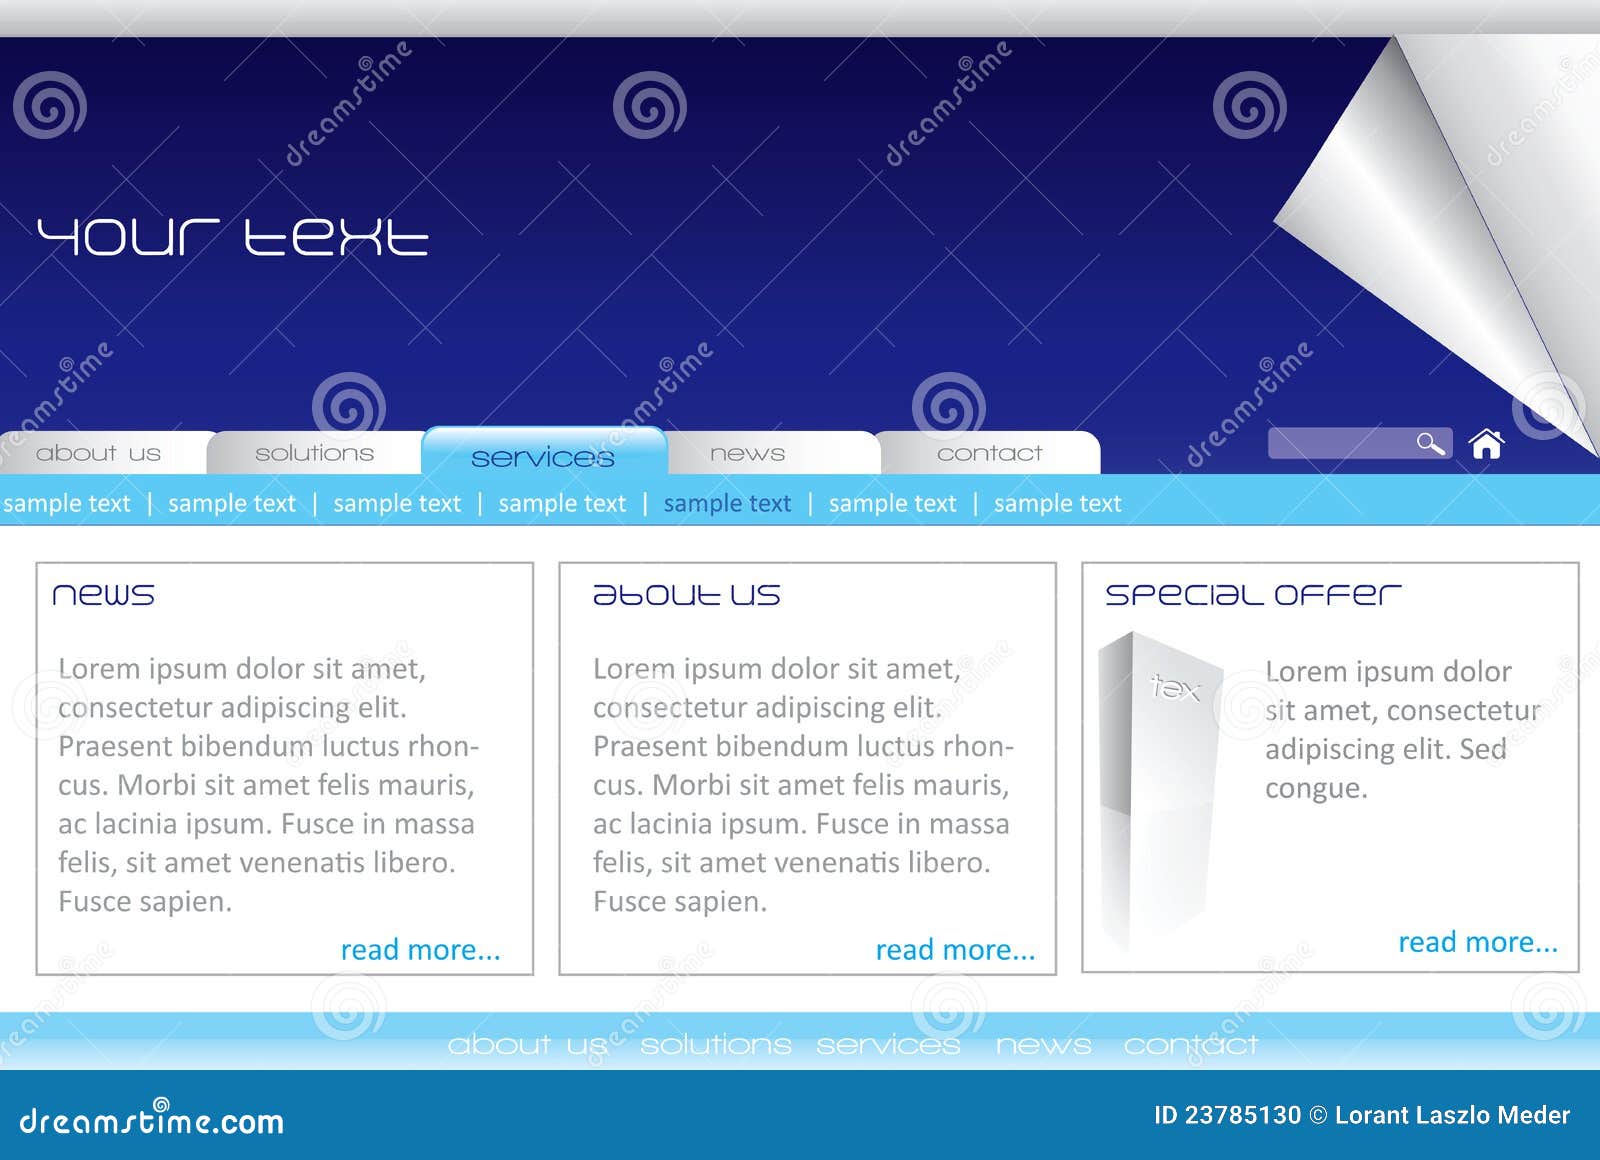 blue theme website templates free download